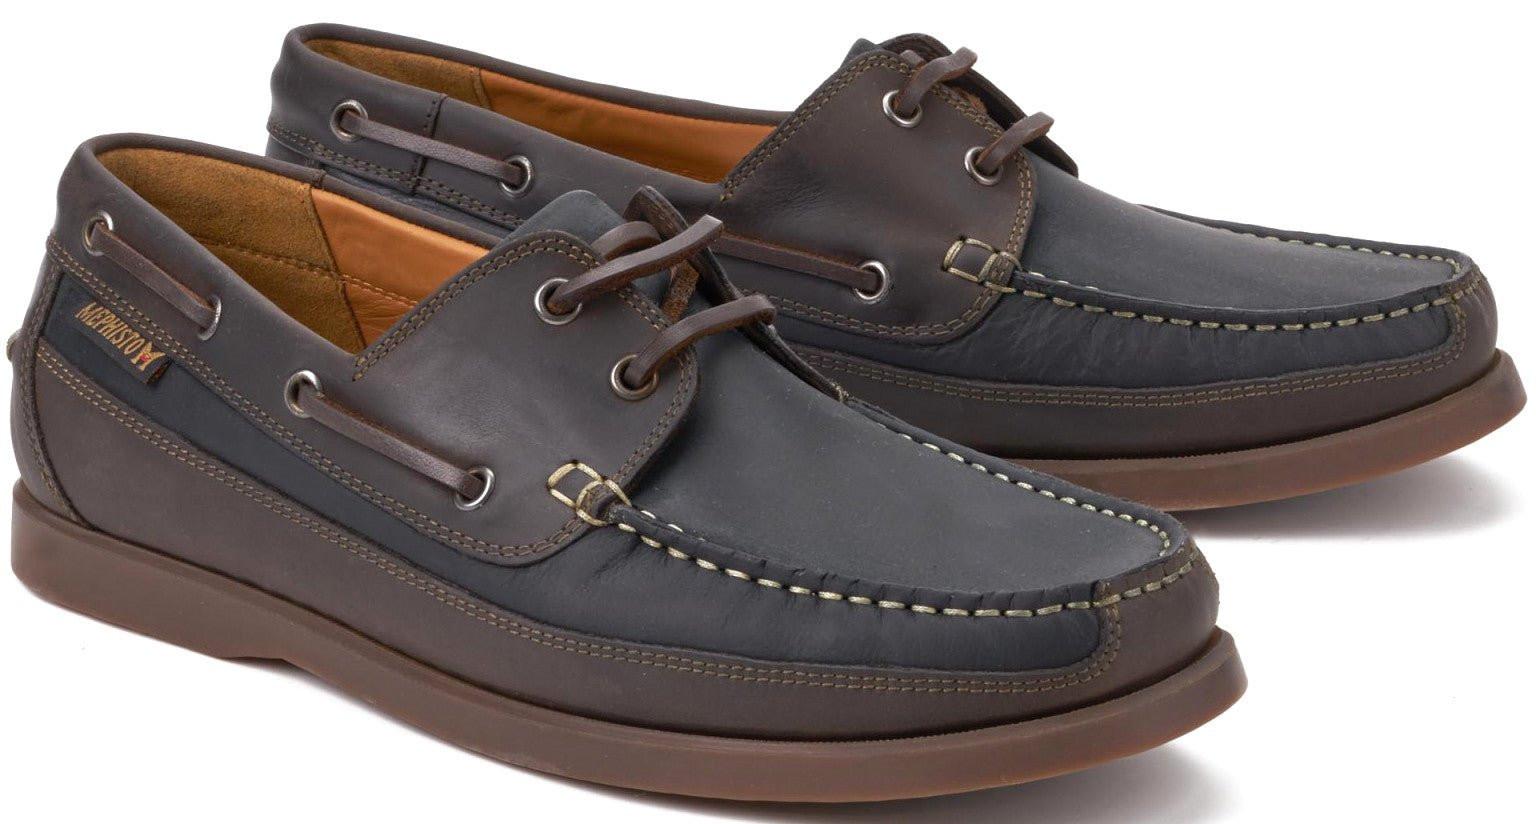 Mephisto  Boating - Chaussure à lacets cuir 